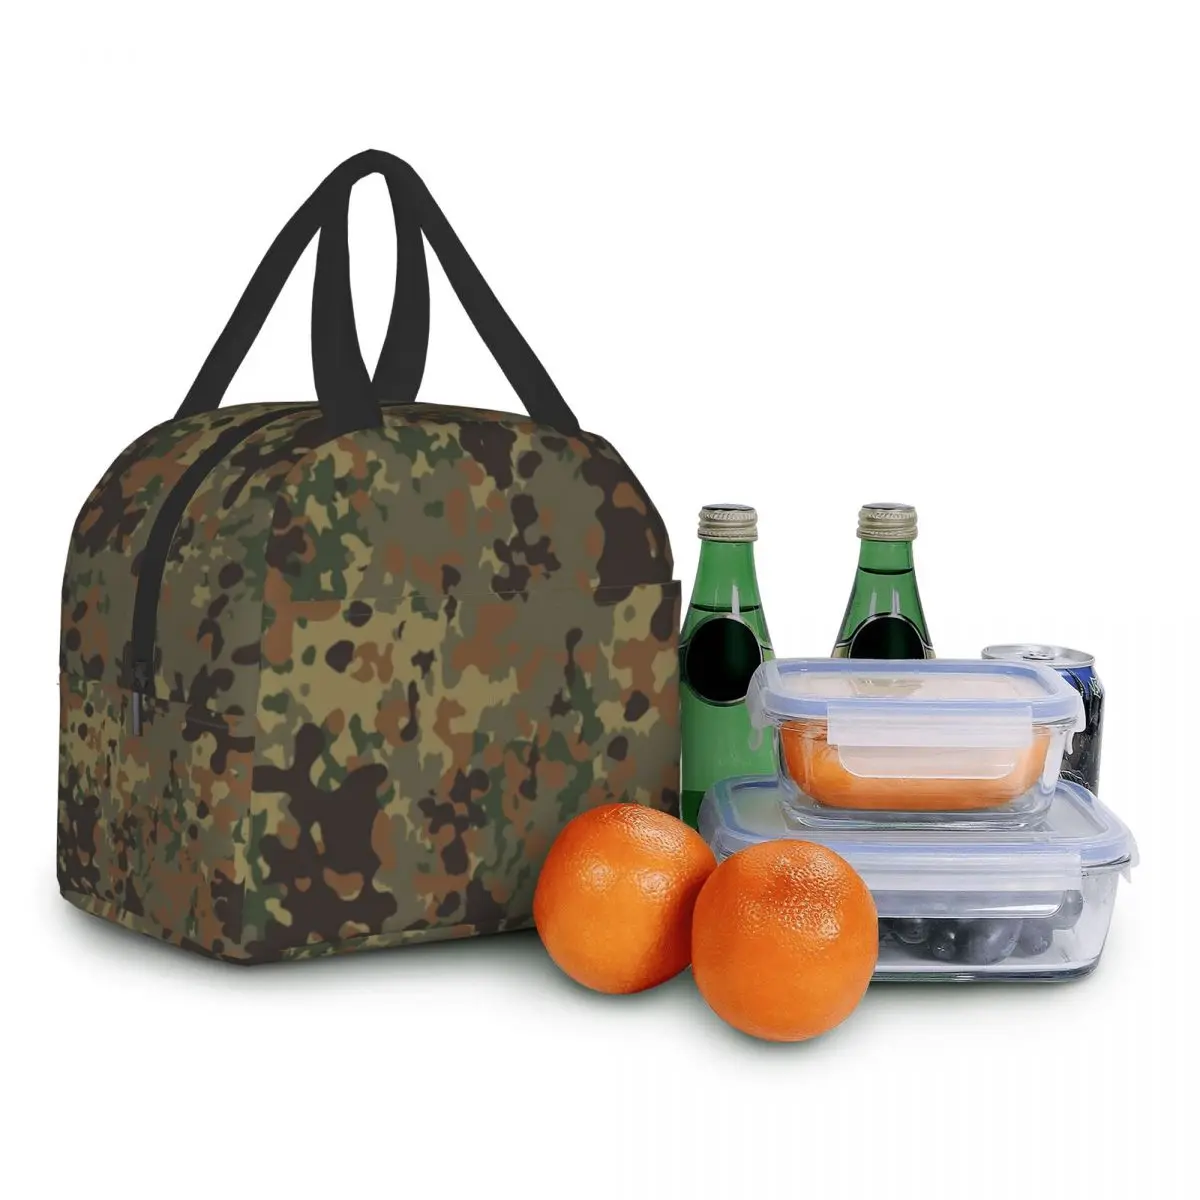 Flecktarn Camo Insulated Lunch Tote Bag for Men Military Army Camouflage Cooler Thermal Food Lunch Box Outdoor Camping Travel images - 6